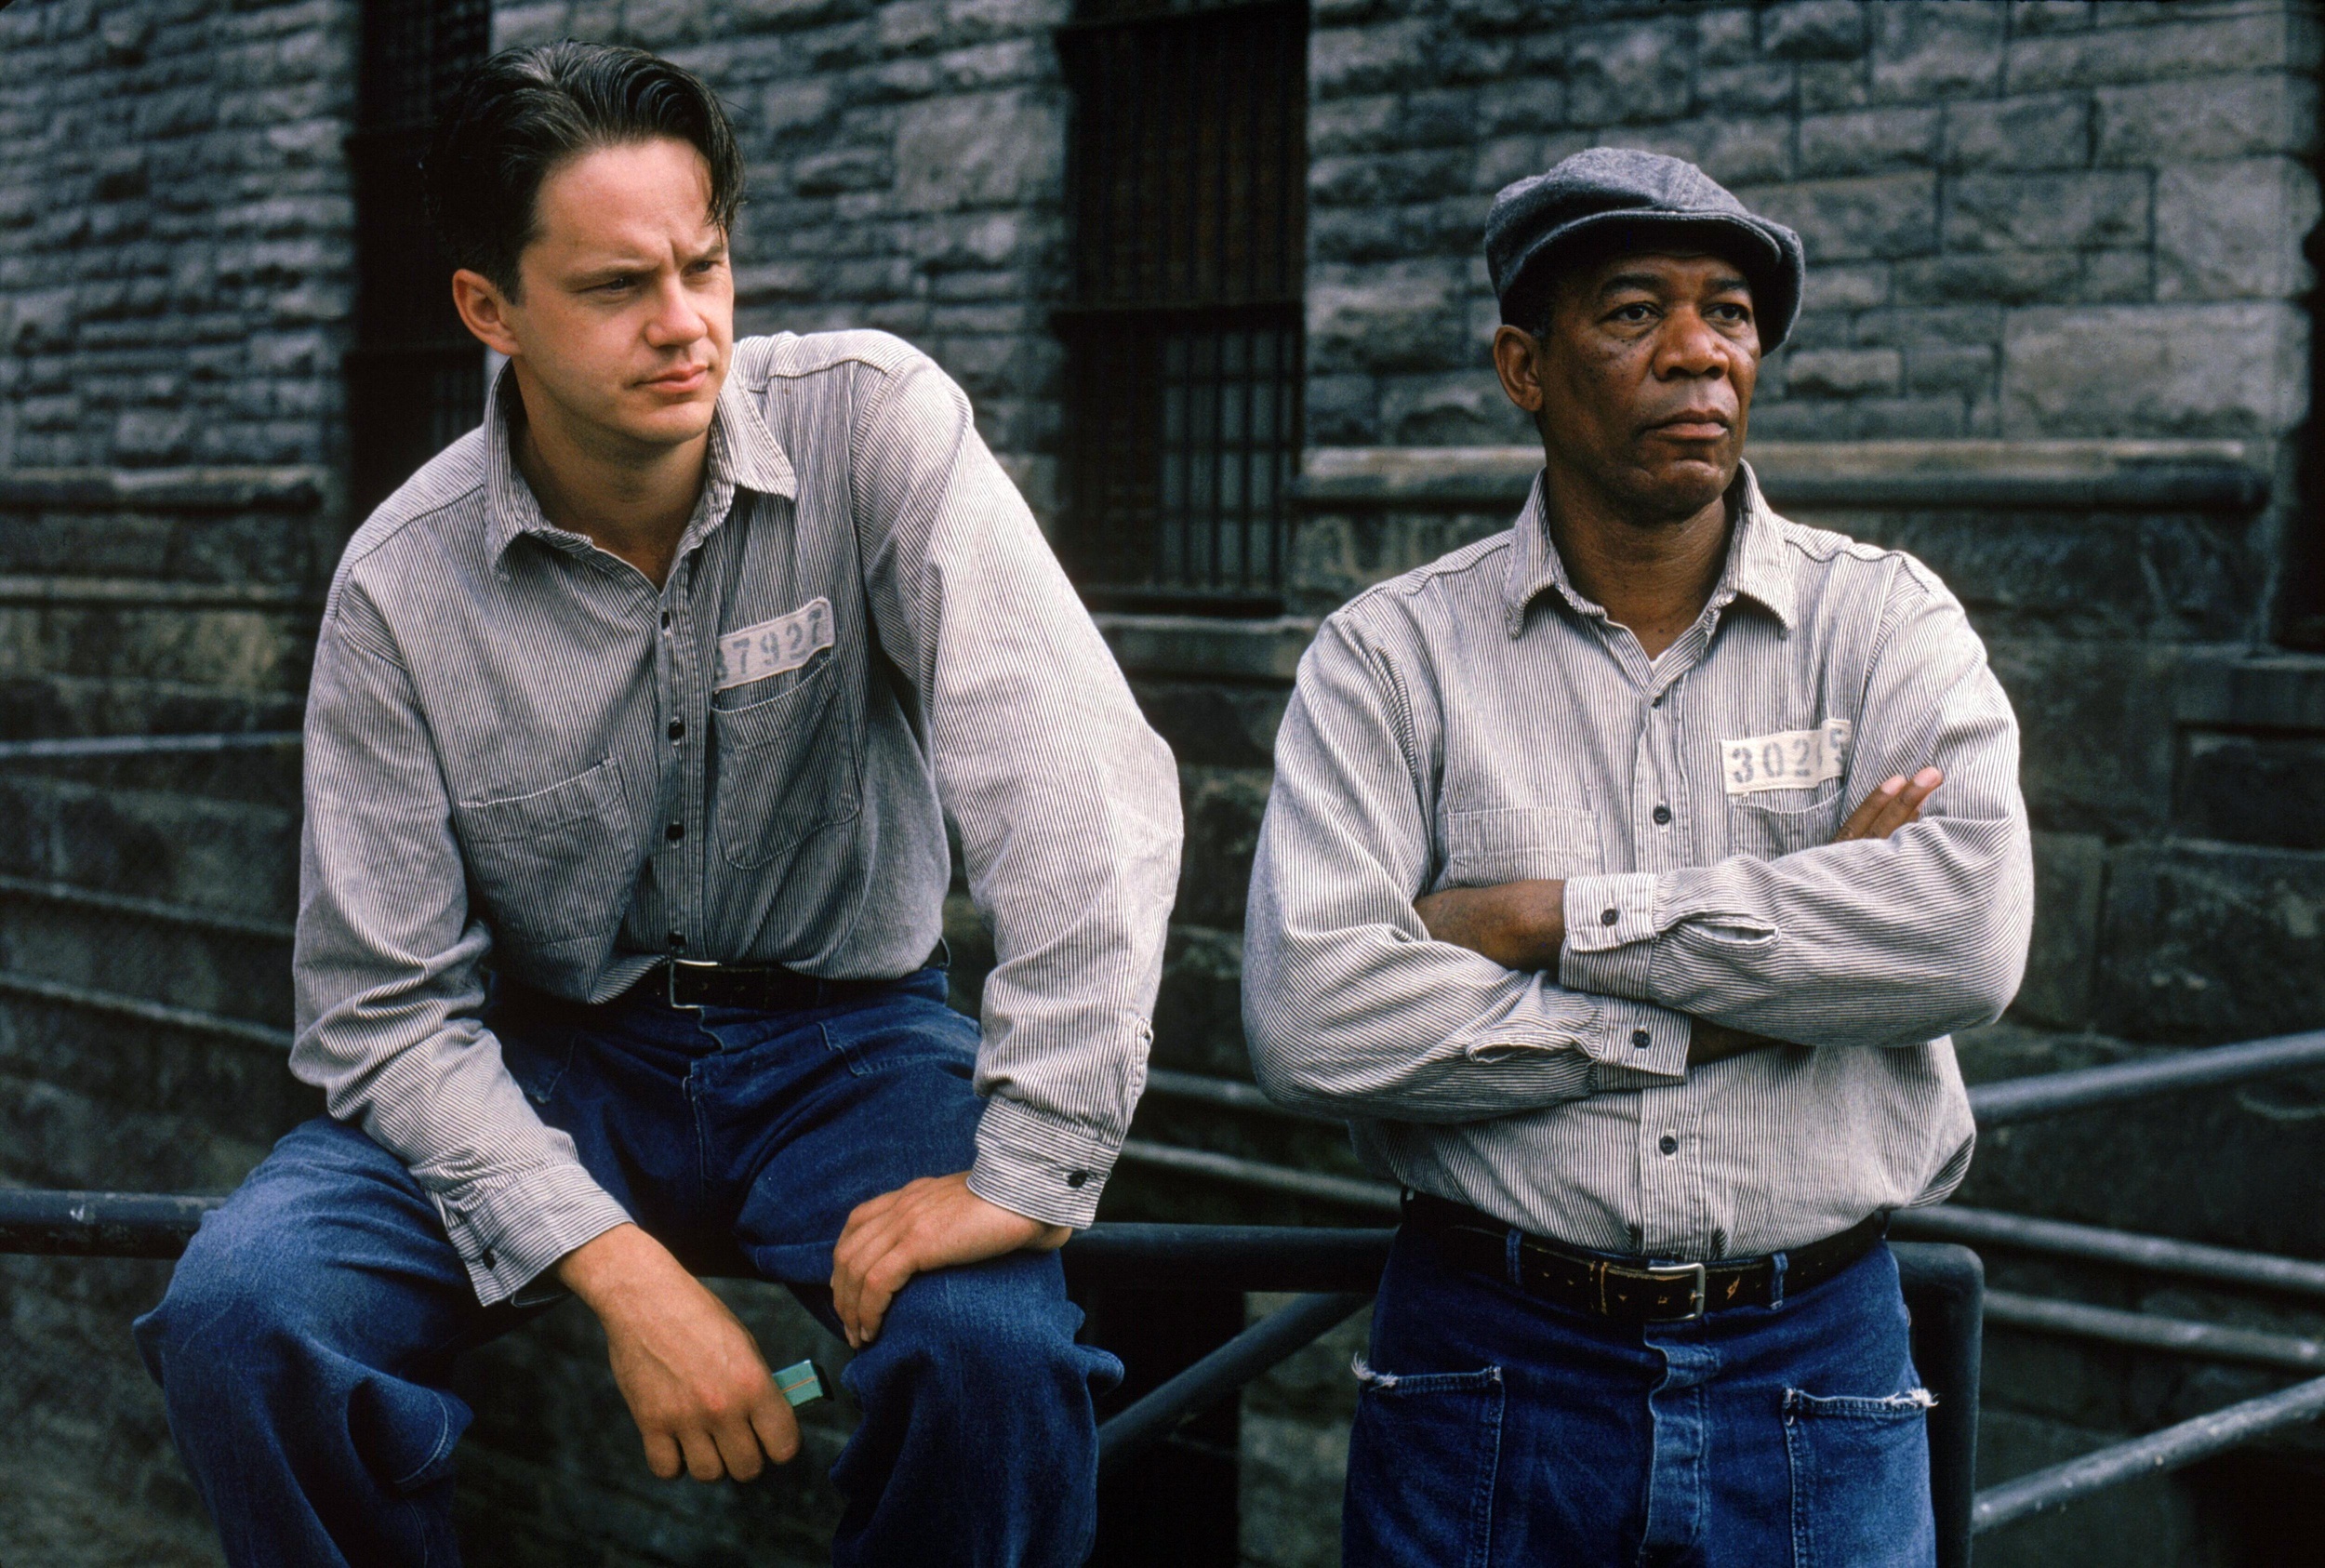 <p>While “The Shawshank Redemption” is not a two-hander between Tim Robbins and Morgan Freeman, the characters of Andy and Red dominate on the memorable quote front. Andy’s refrain of “Get busy living, or get busy dying” is arguably the most-quoted line from the film.</p><p>You may also like: <a href='https://www.yardbarker.com/entertainment/articles/the_definitive_the_who_playlist_101023/s1__35381054'>The definitive The Who playlist</a></p>